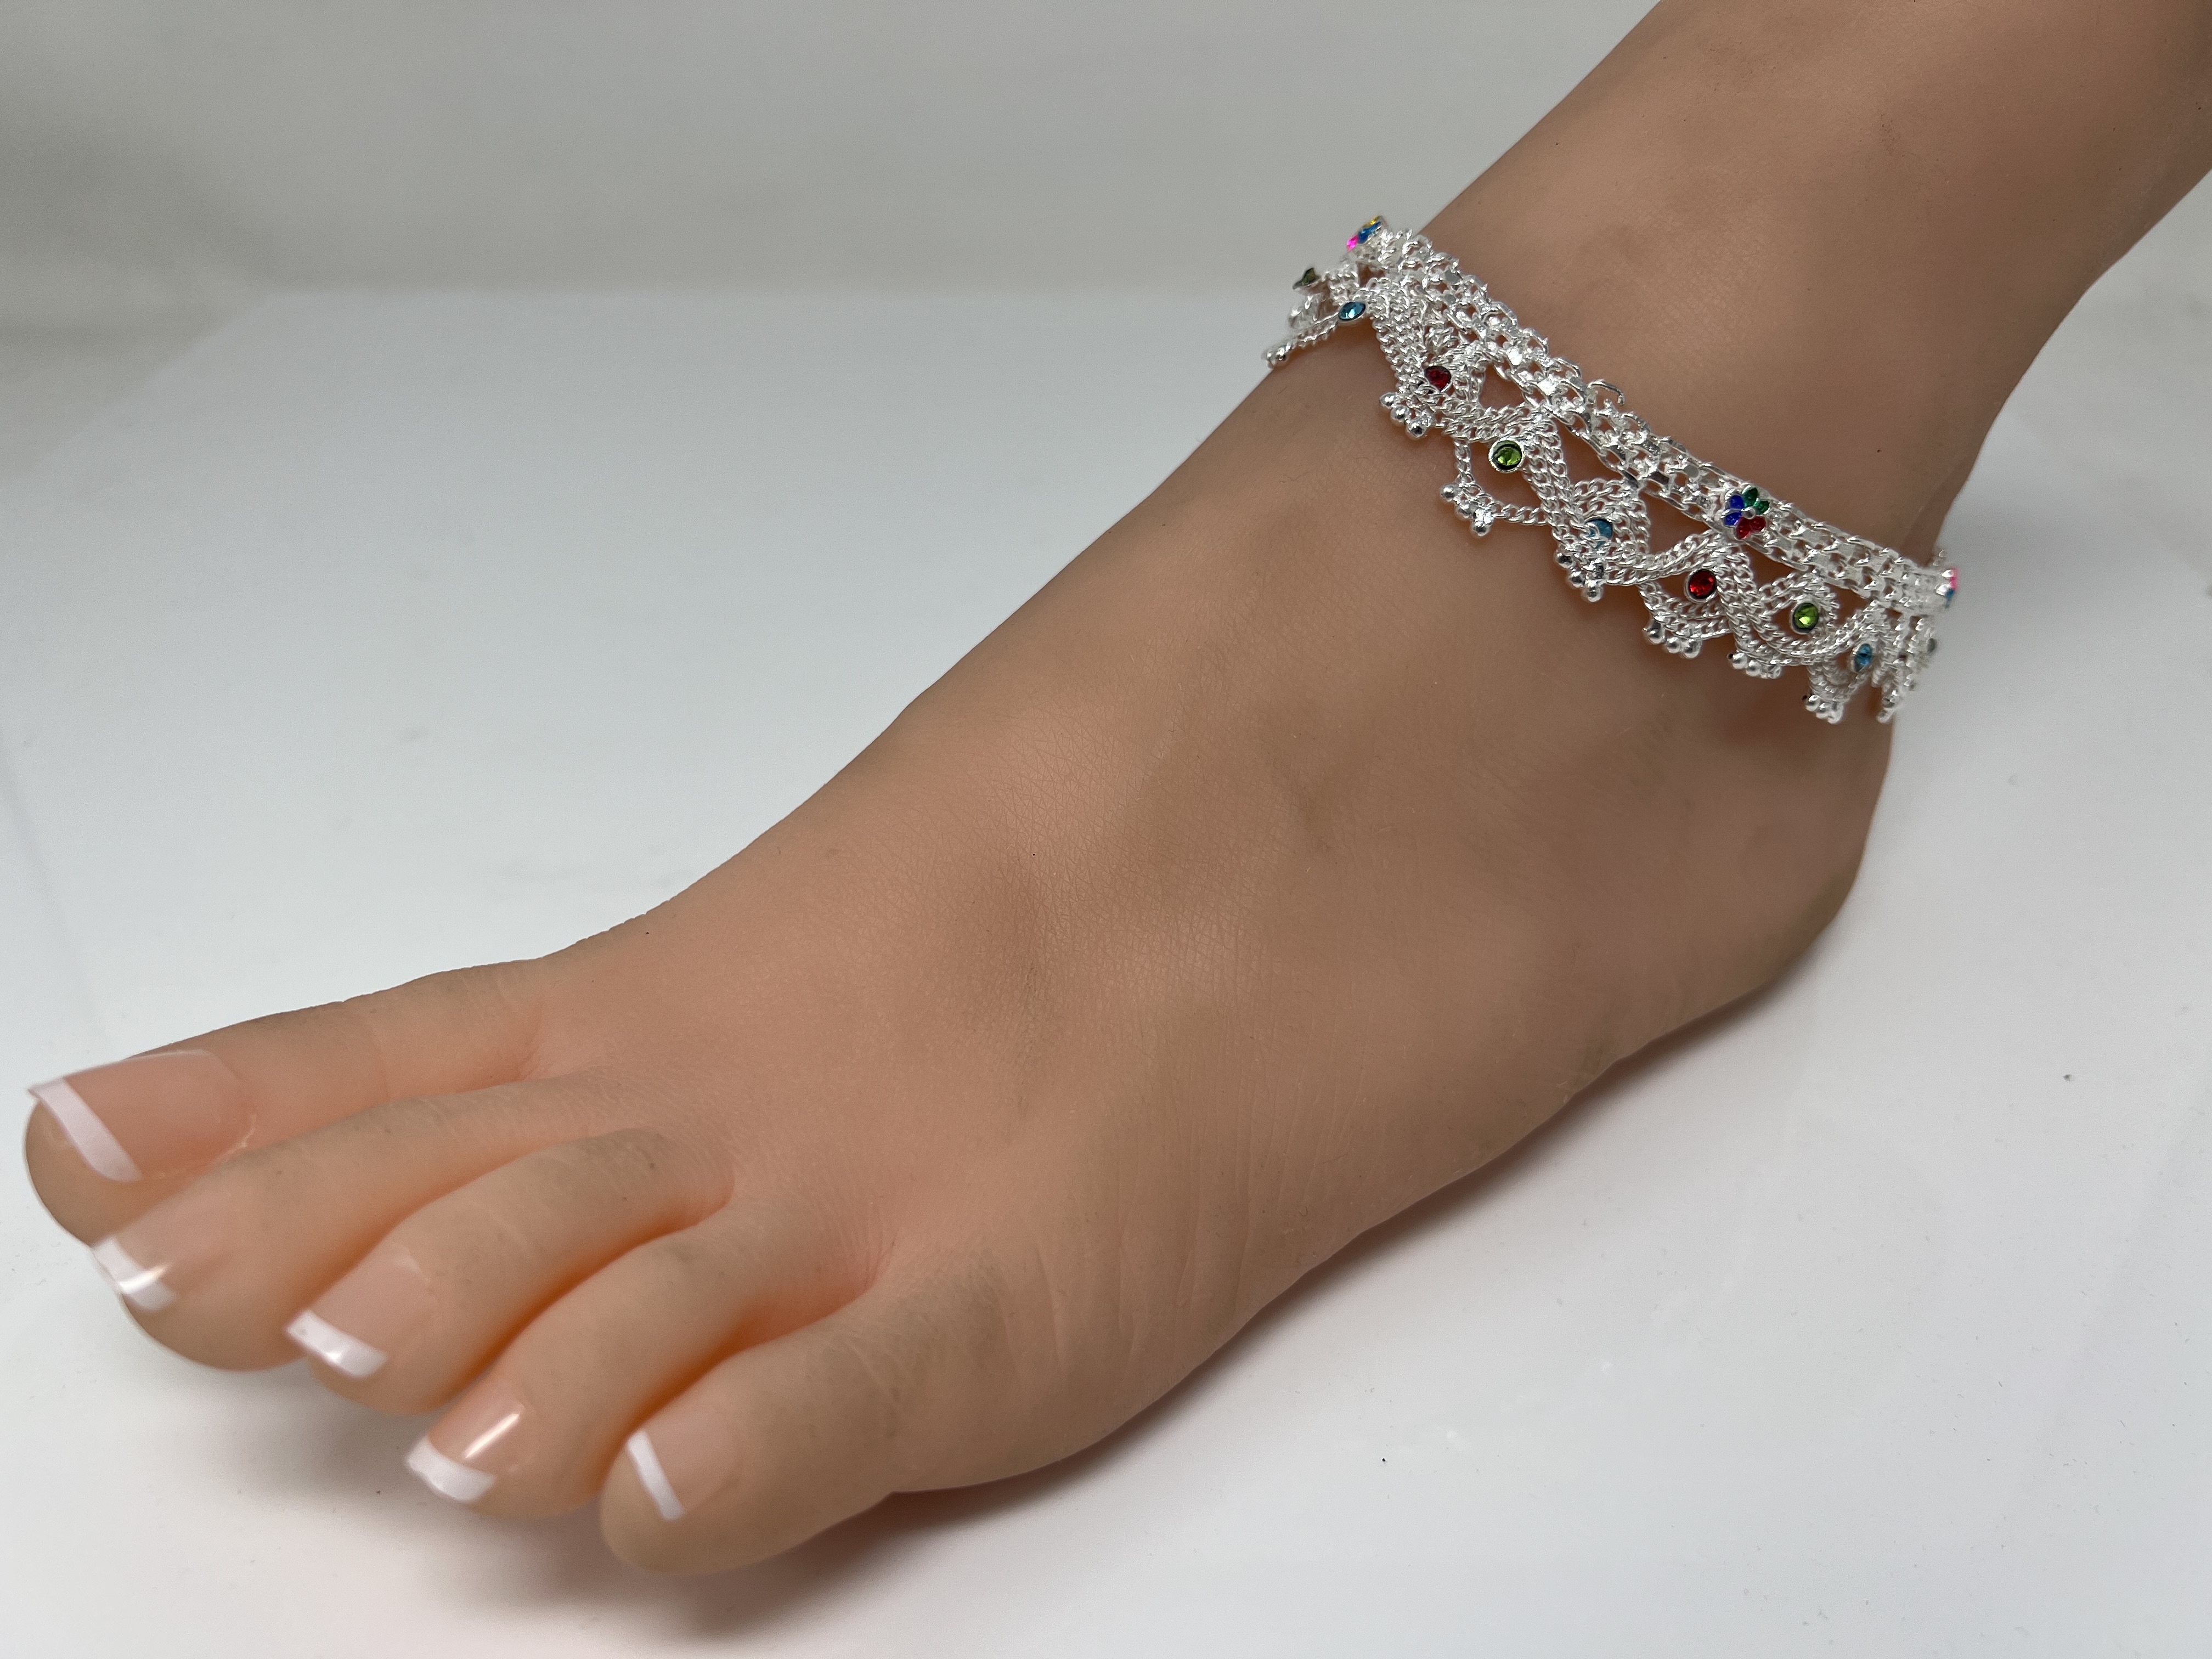 A11 Pair of Anklets Payal with Rhinestones and meenakari for Legs